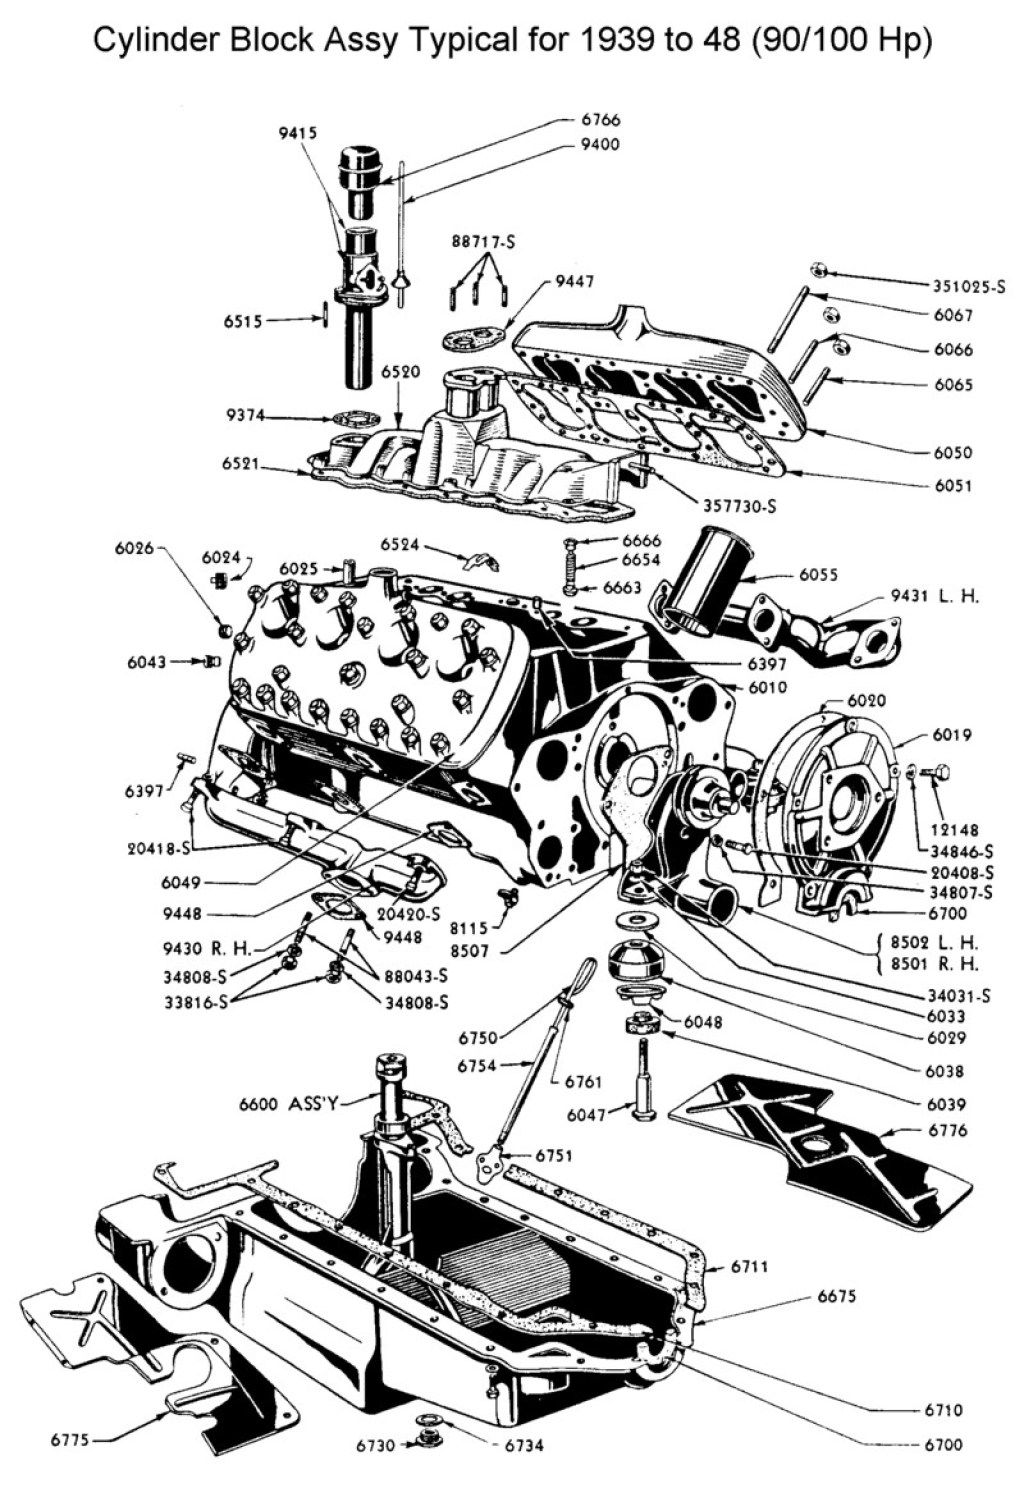 Picture of: Flathead Parts Drawings-Engines